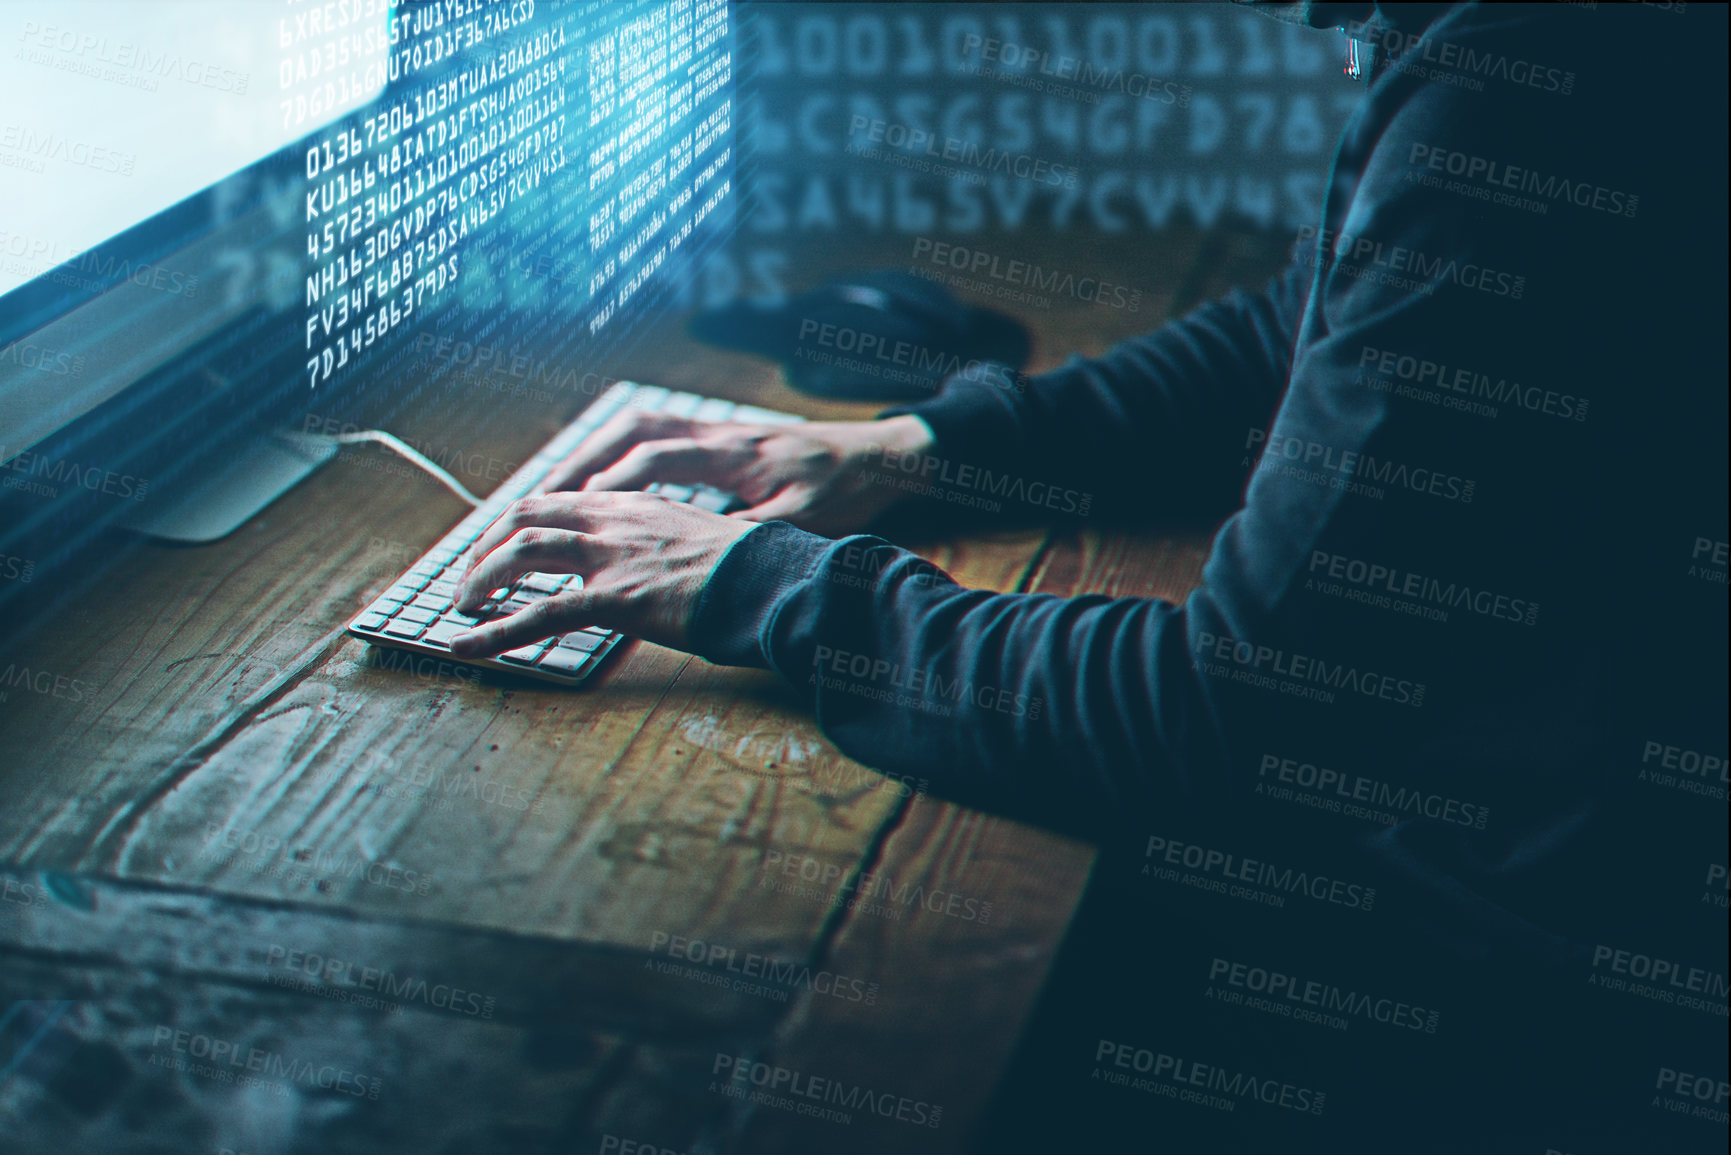 Buy stock photo Cropped shot of a male hacker at work